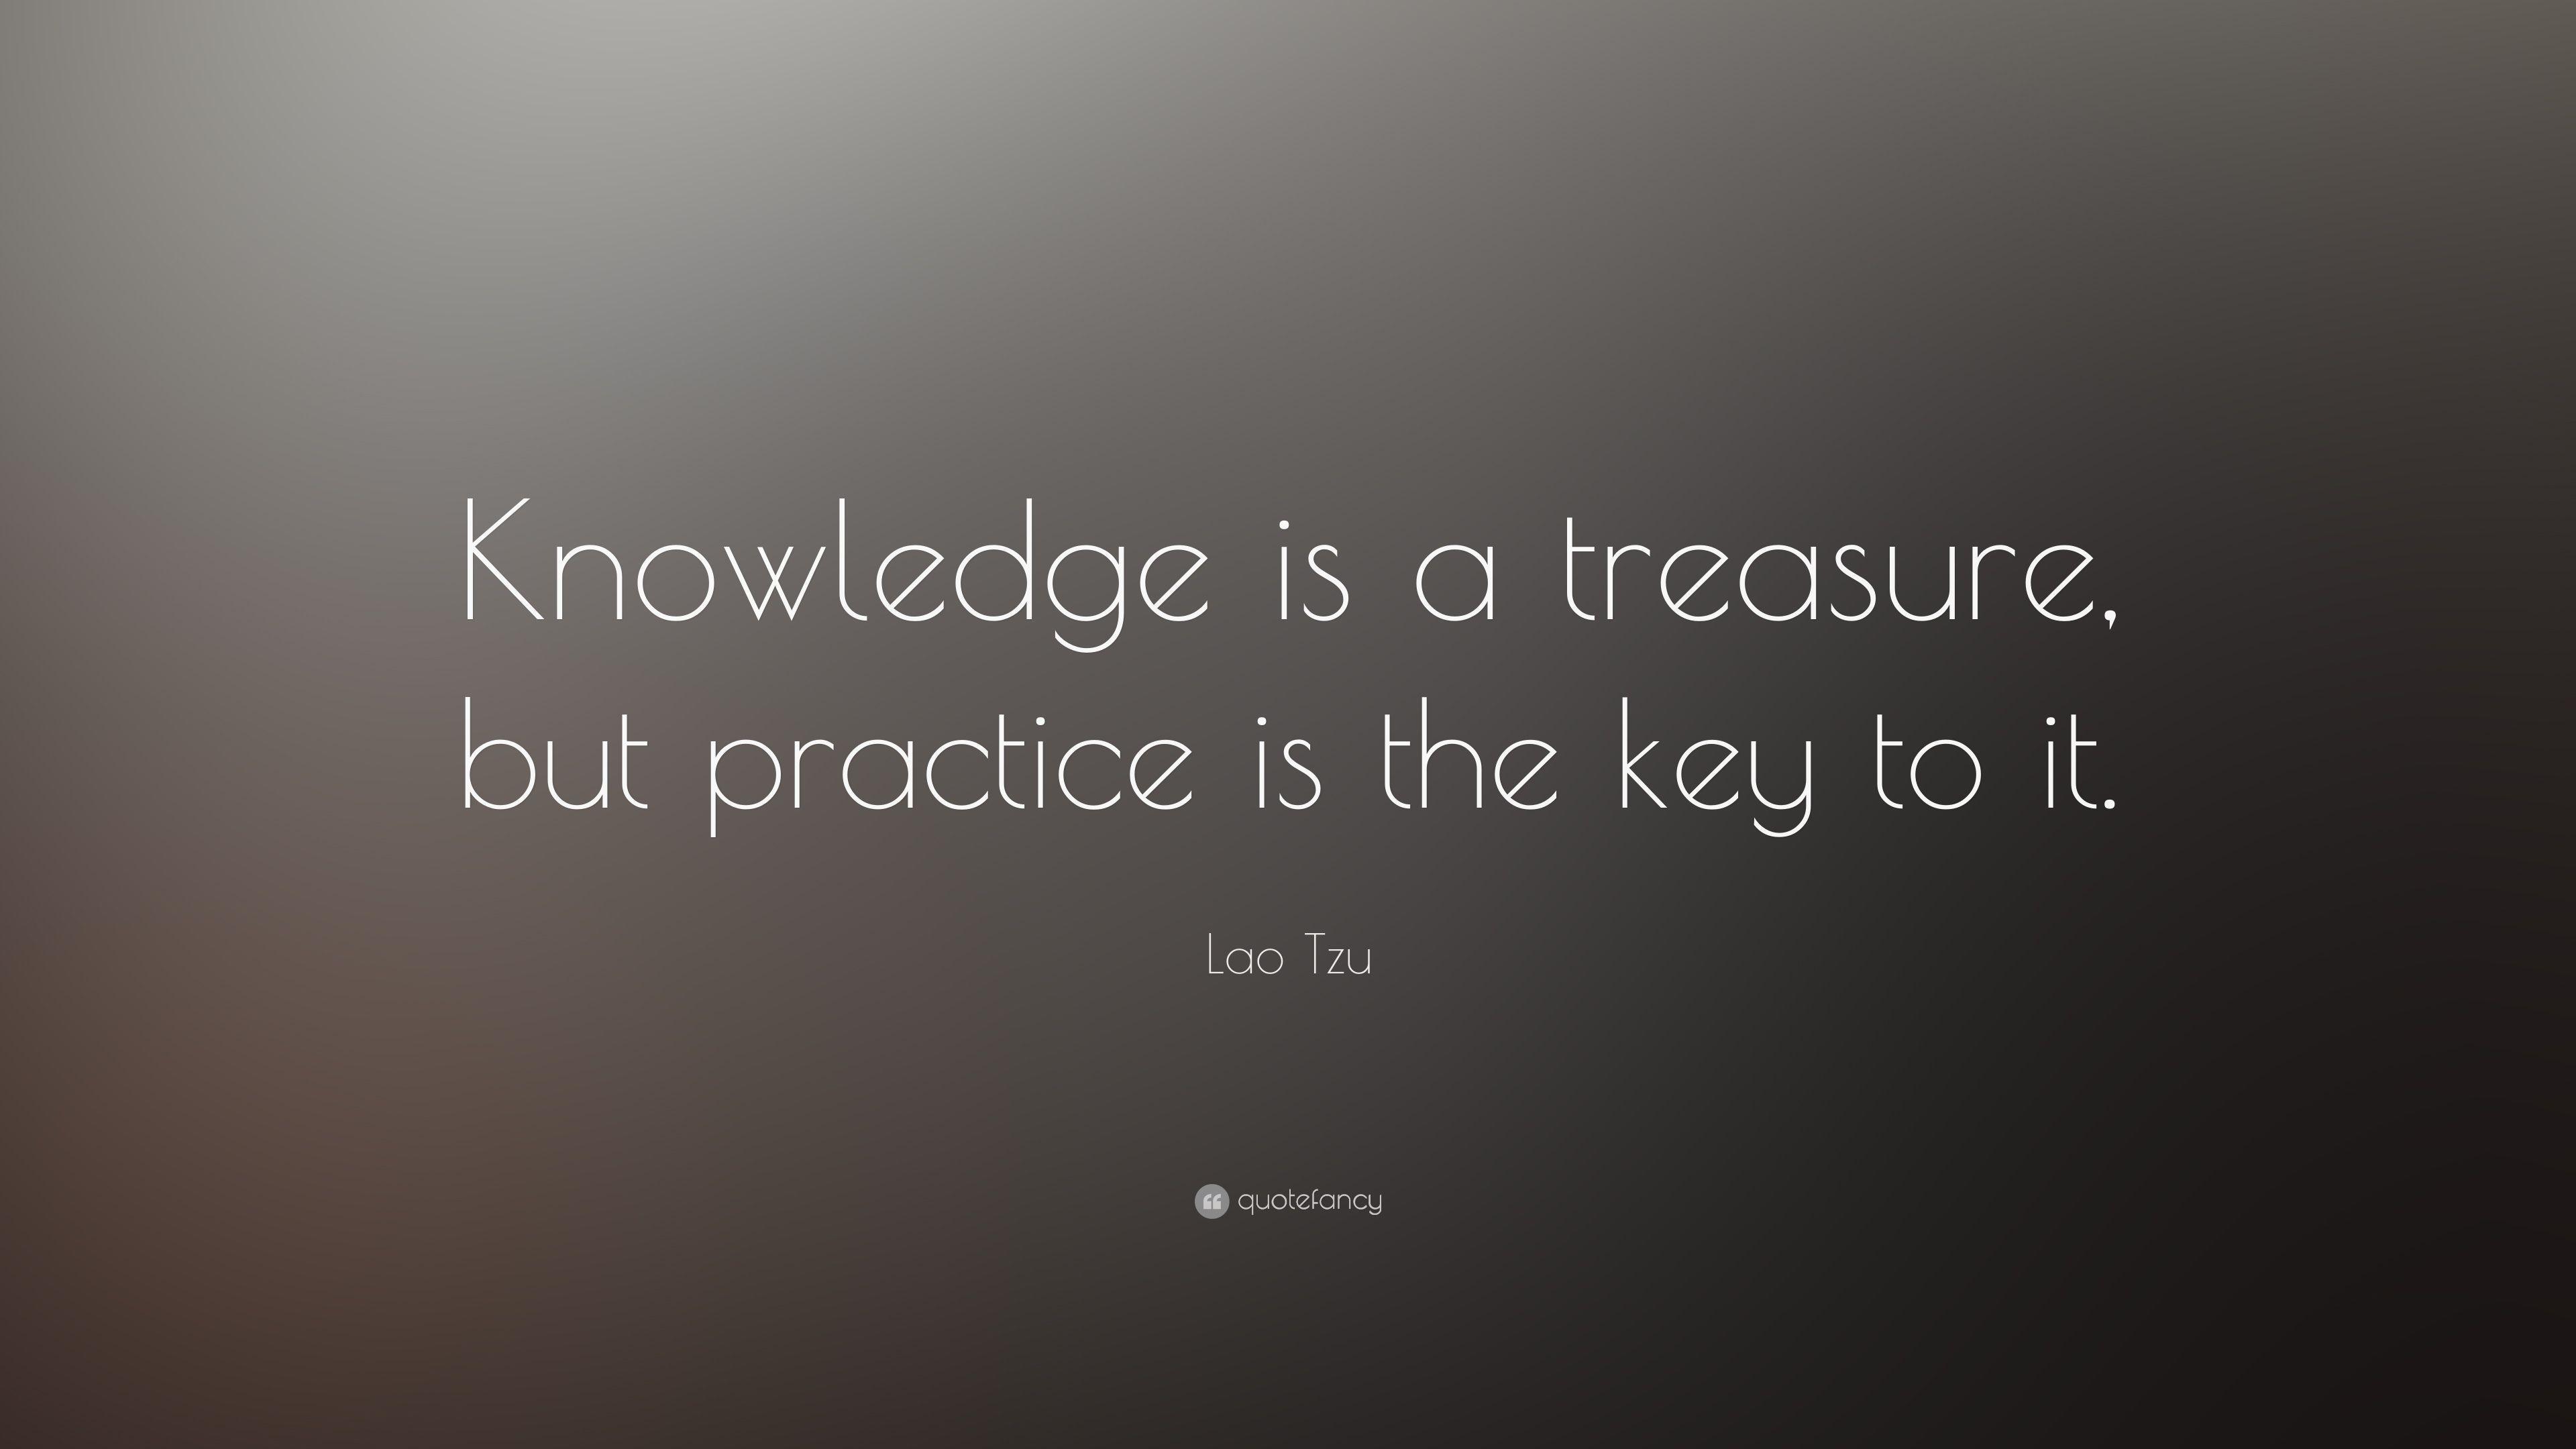 Lao Tzu Quote: “Knowledge is a treasure, but practice is the key